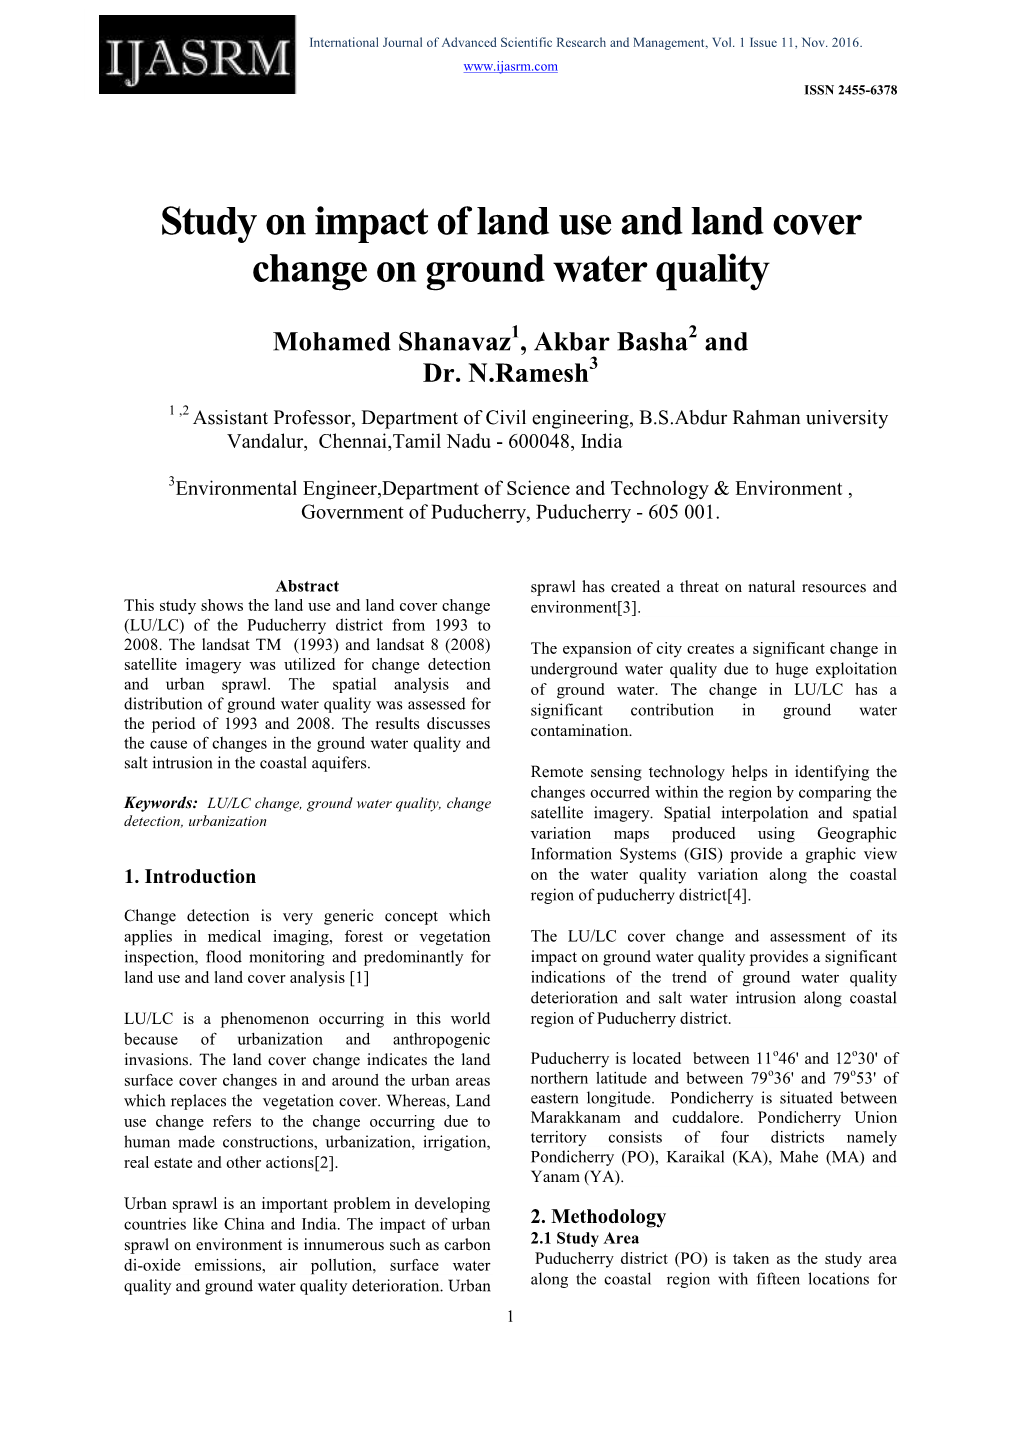 Study on Impact of Land Use and Land Cover Change on Ground Water Quality